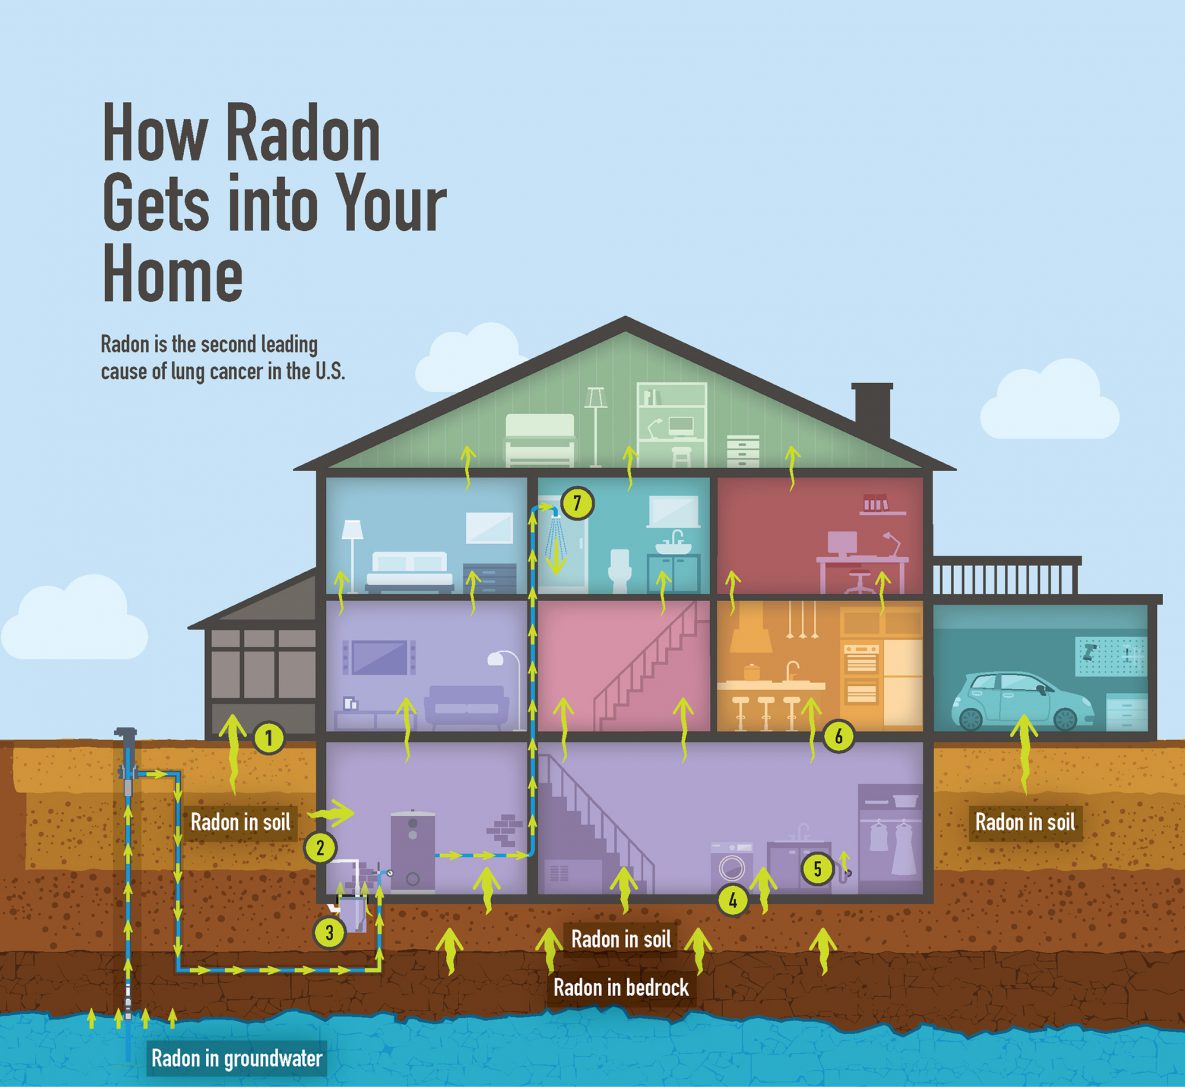 Cross section of a house showing how radon enters a home